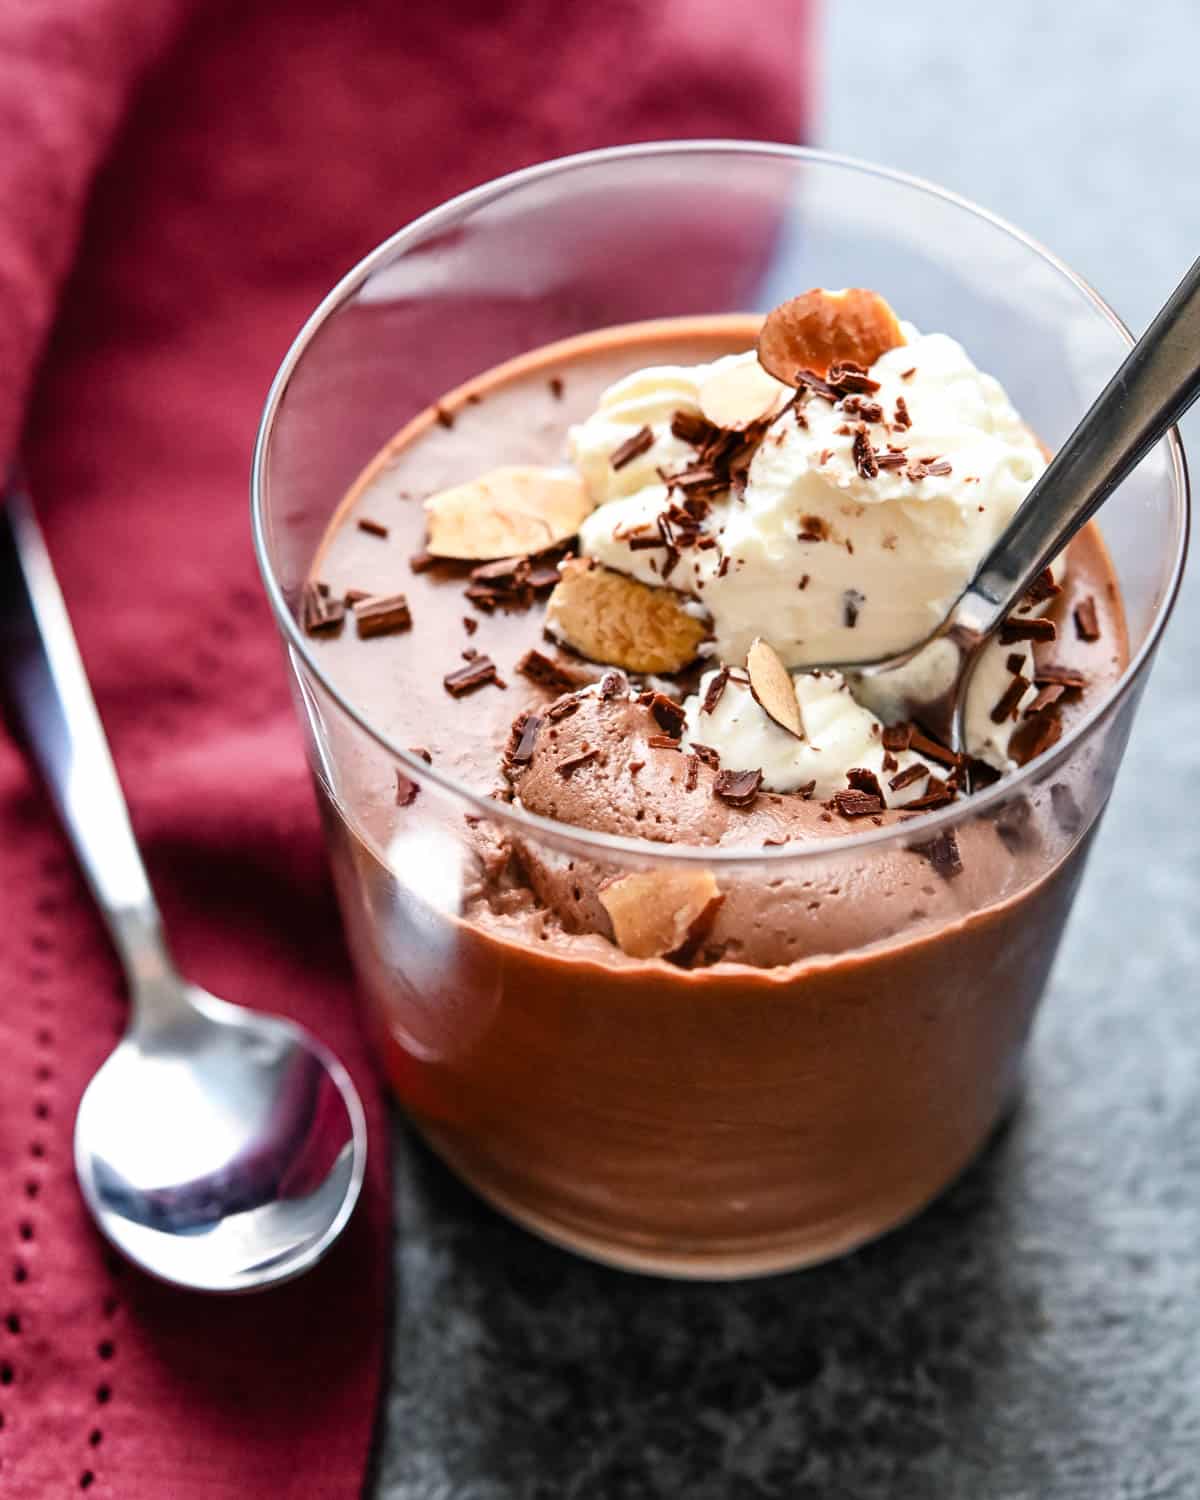 a homemade chocolate mousse with whipped cream.